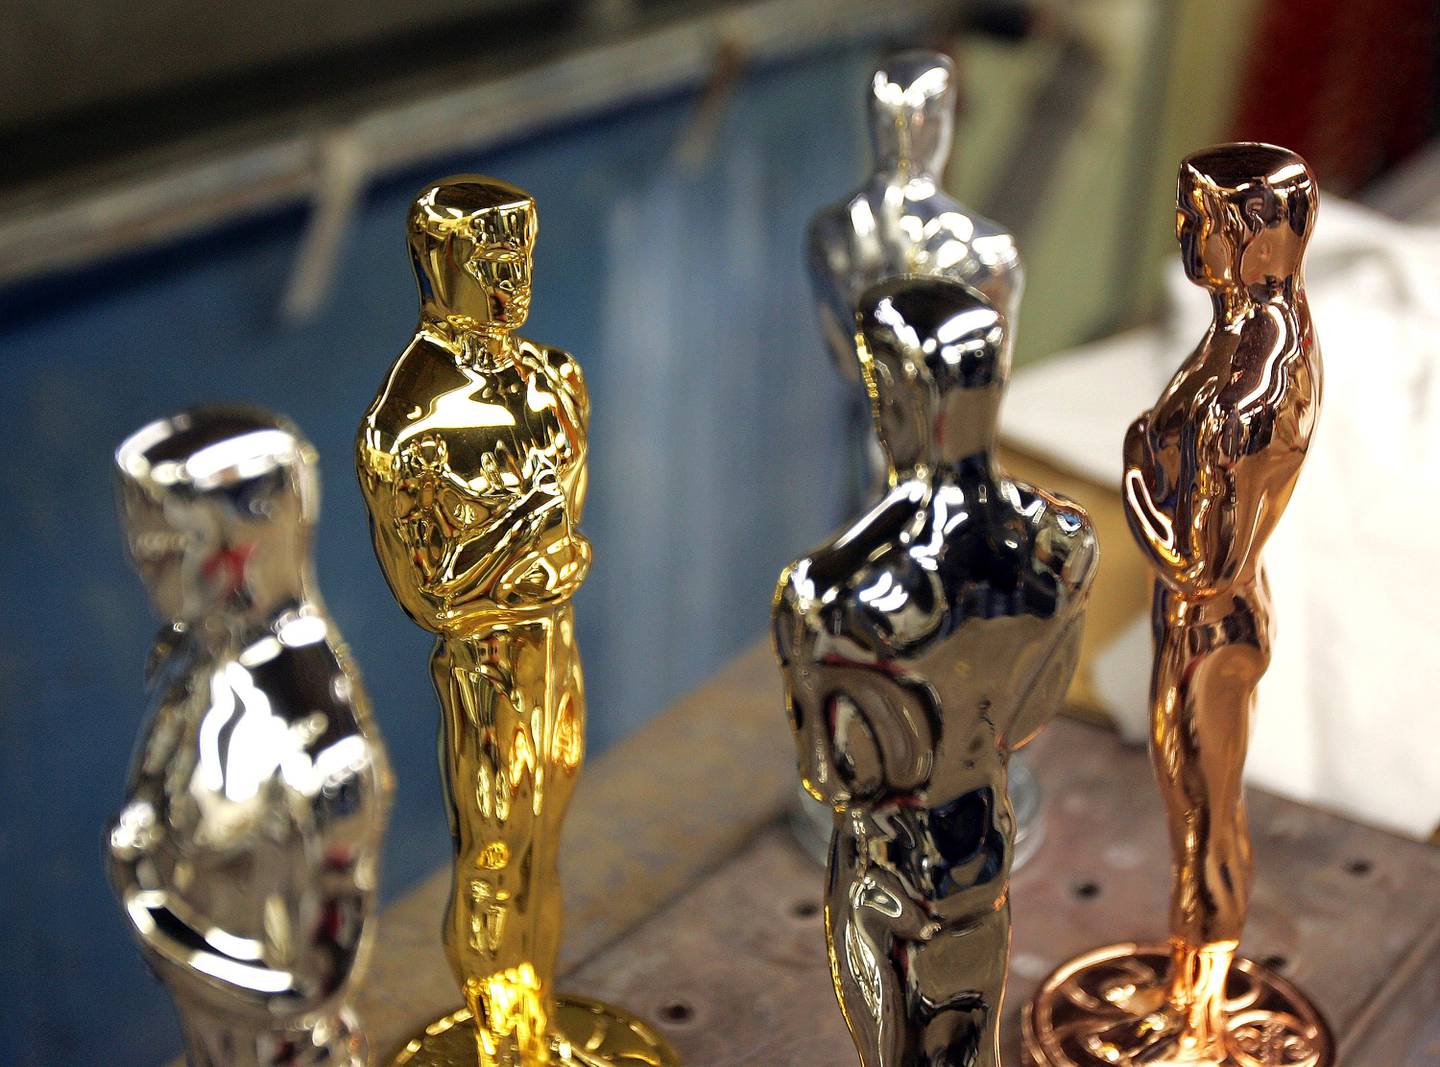 Oscar statuettes in various stages of the plating process are displayed at the R.S. Owens factory in Chicago, Illinois, U.S., on Thursday, Jan. 10, 2008. For most people the Academy Awards are about fancy dresses, weepy actresses and mind-numbingly long speeches. But don't forget that the Oscars are also one of the best betting events of the year. Photographer: Tim Boyle/Bloomberg News